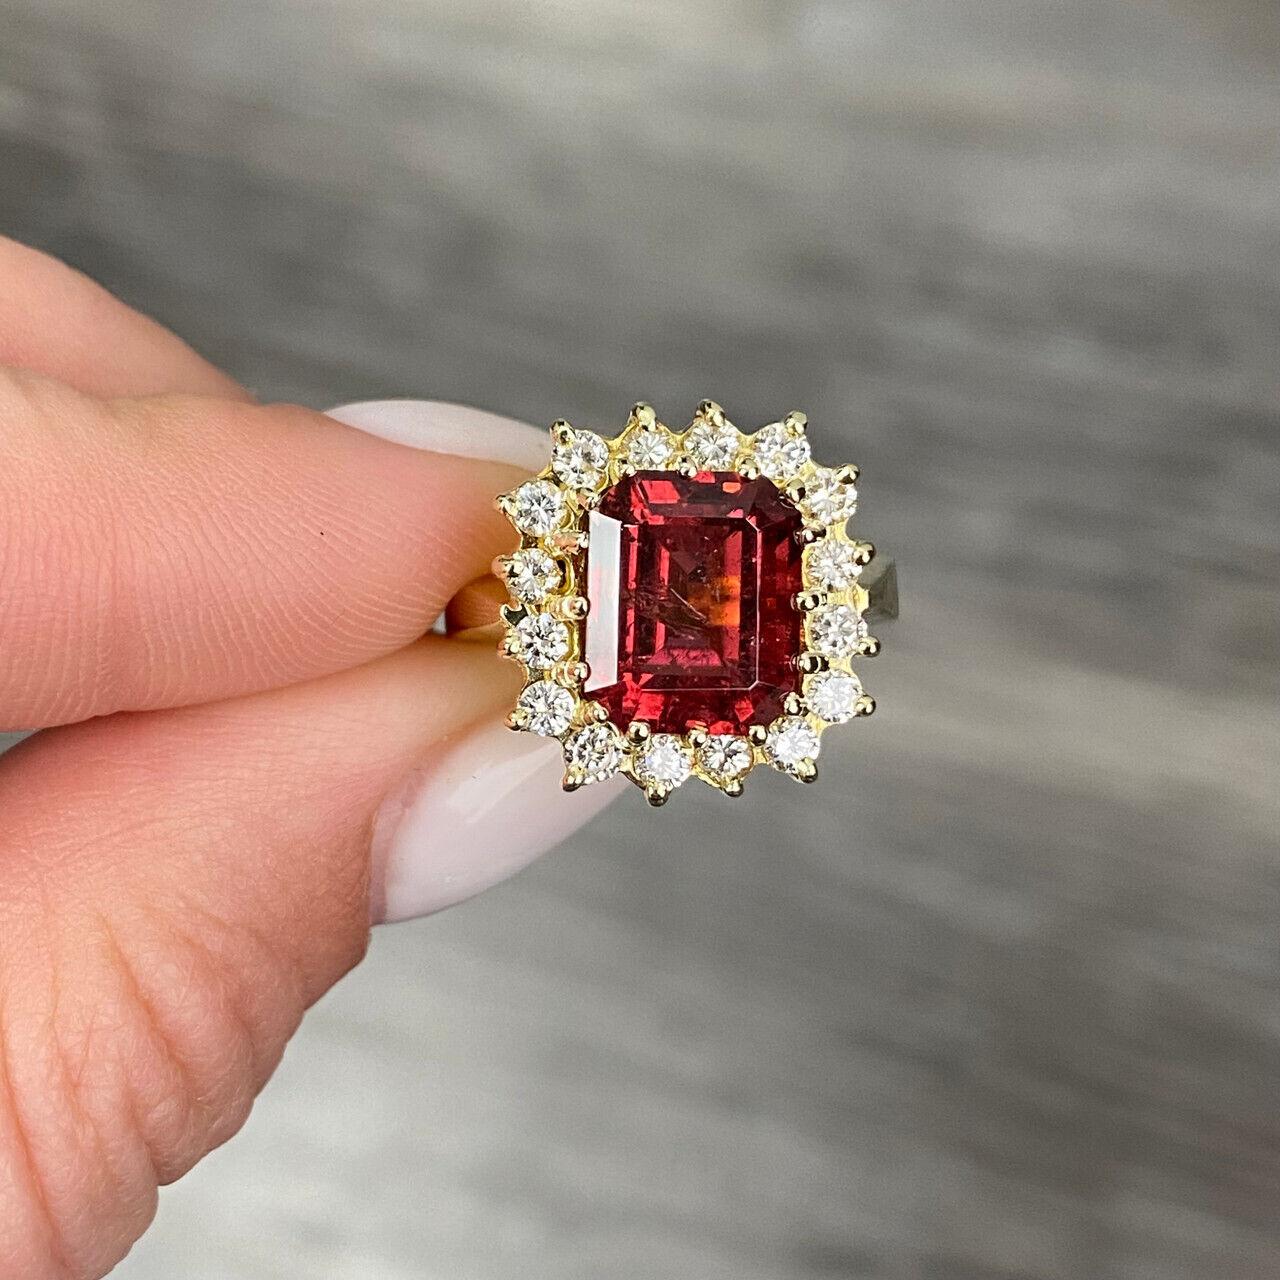 Specifications:
Pre-Owned (Great condition)
Metal: 18K Gold
Weight: 11.1g
Main Stone: 4.25ct Brownish-Red
Side Stones: Approximately 0.96ctw diamonds
Color: H
Clarity: SI1
Size: 5.5 US




